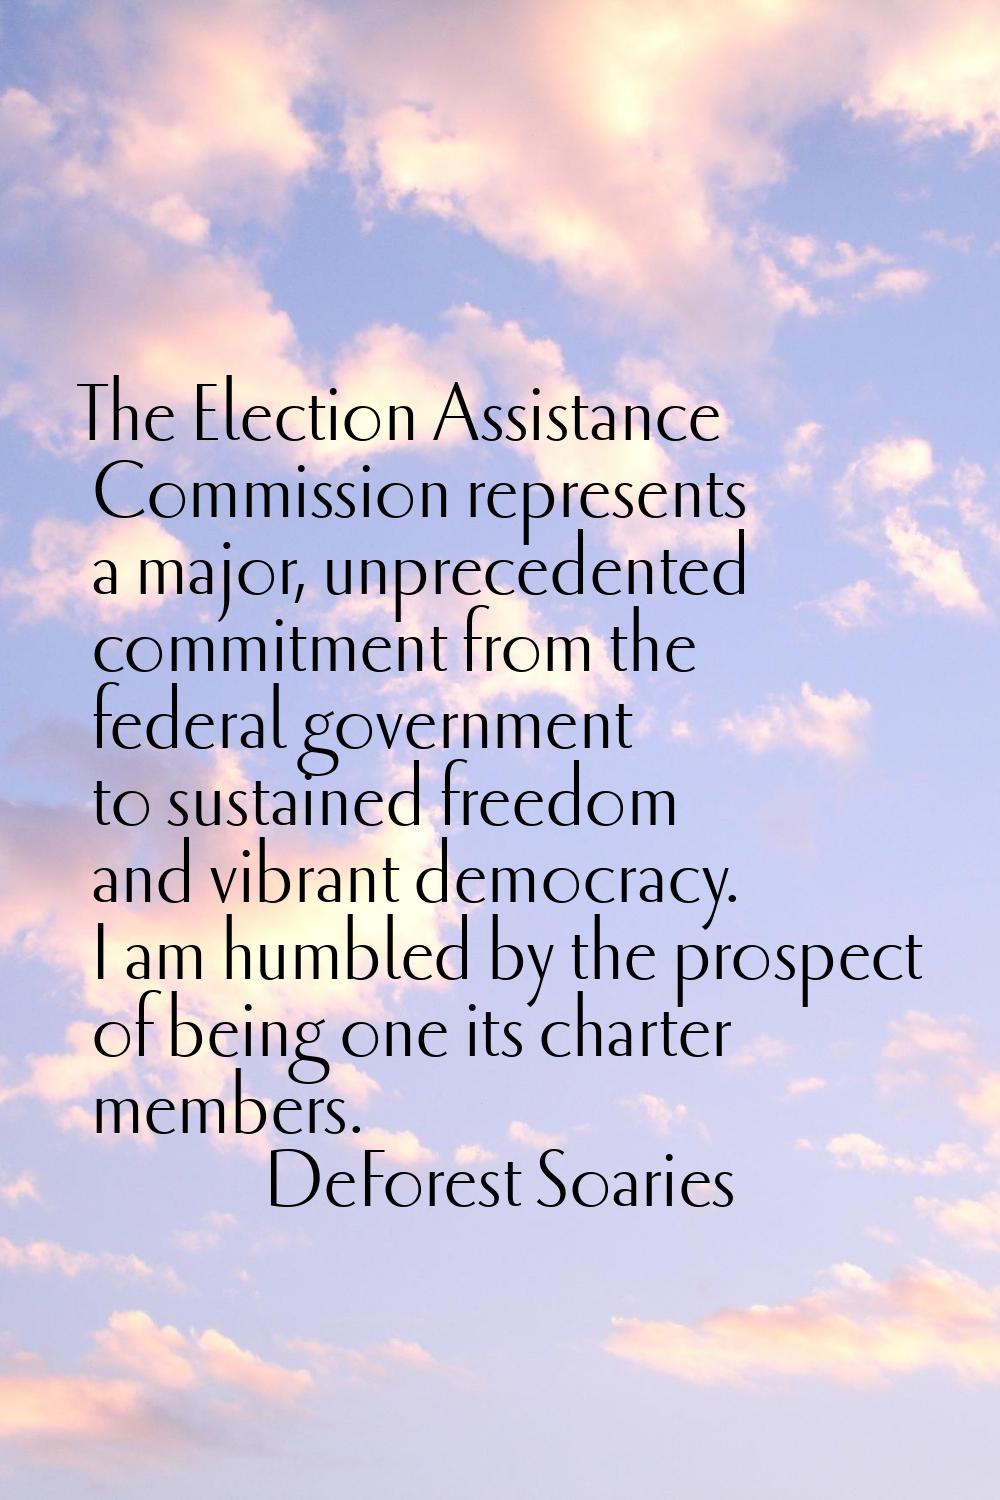 The Election Assistance Commission represents a major, unprecedented commitment from the federal go